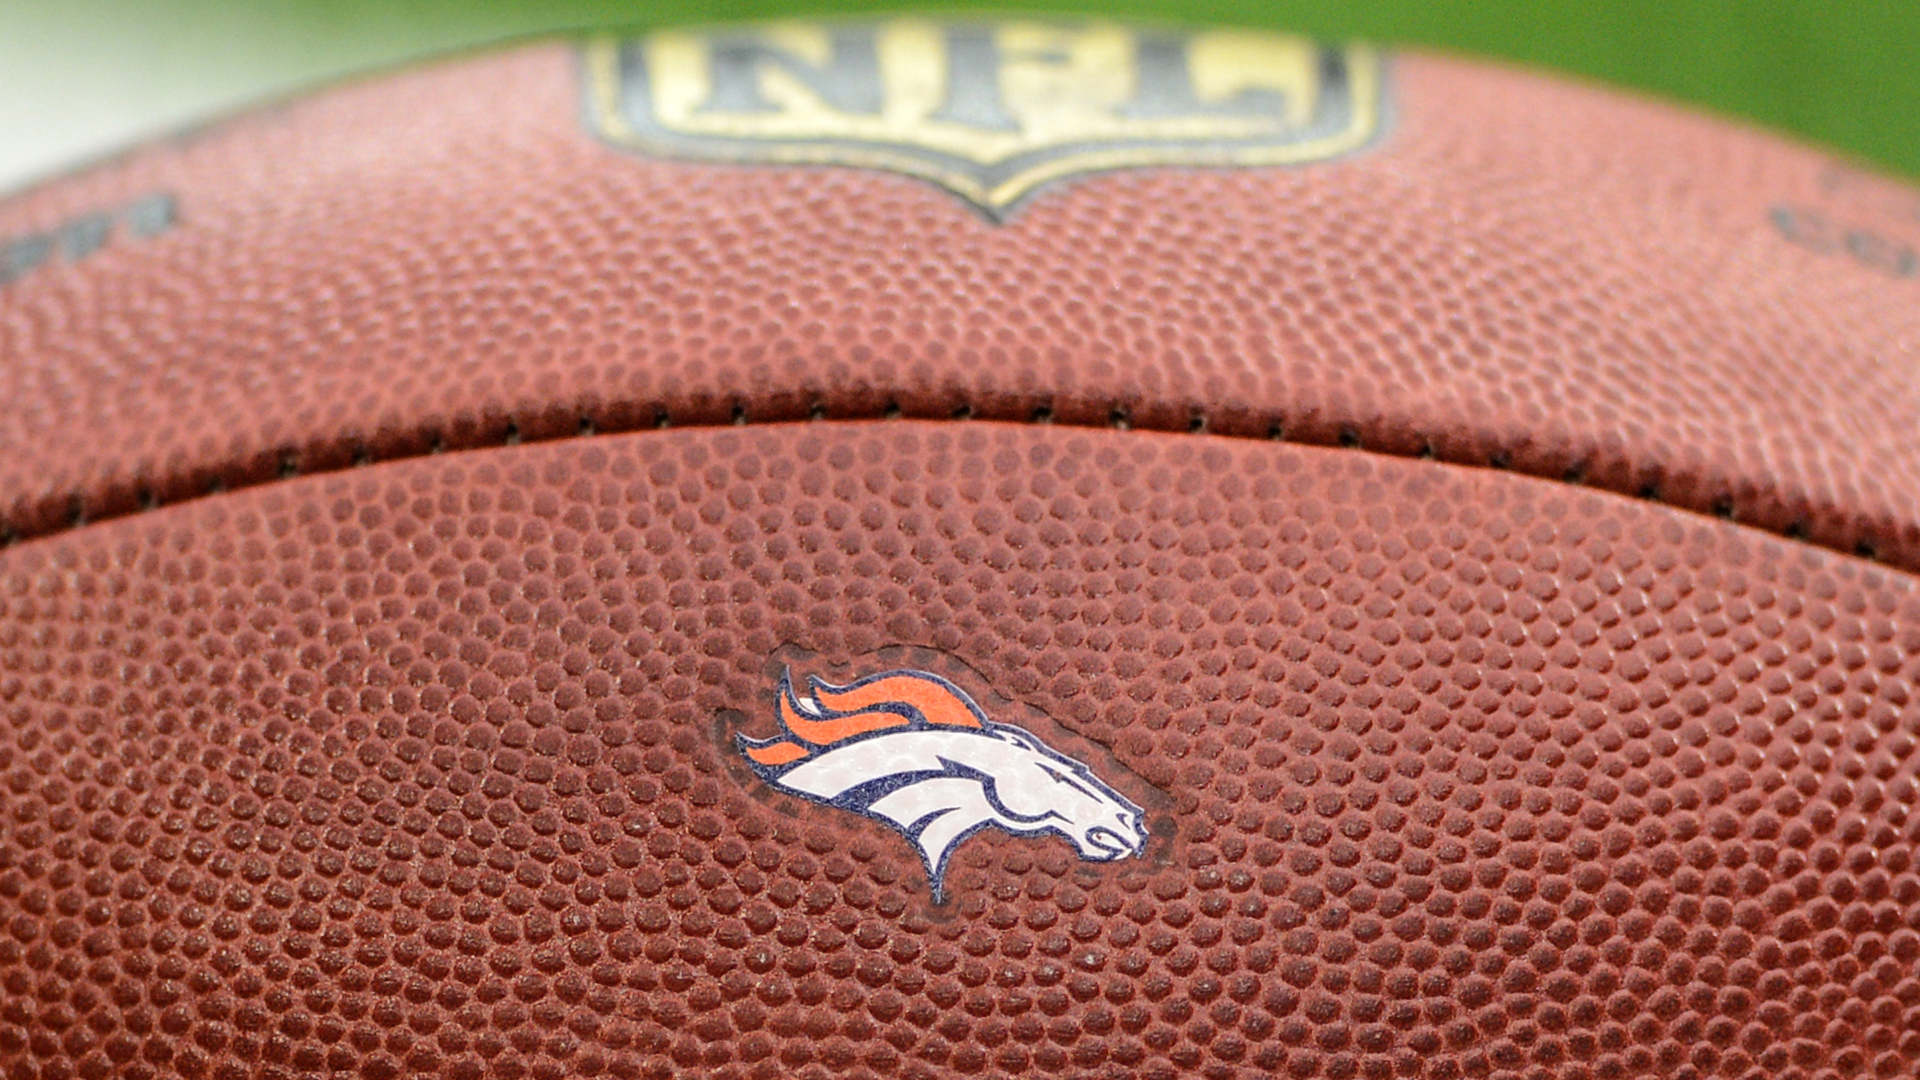 Walton-Penner group agrees to purchase Denver Broncos